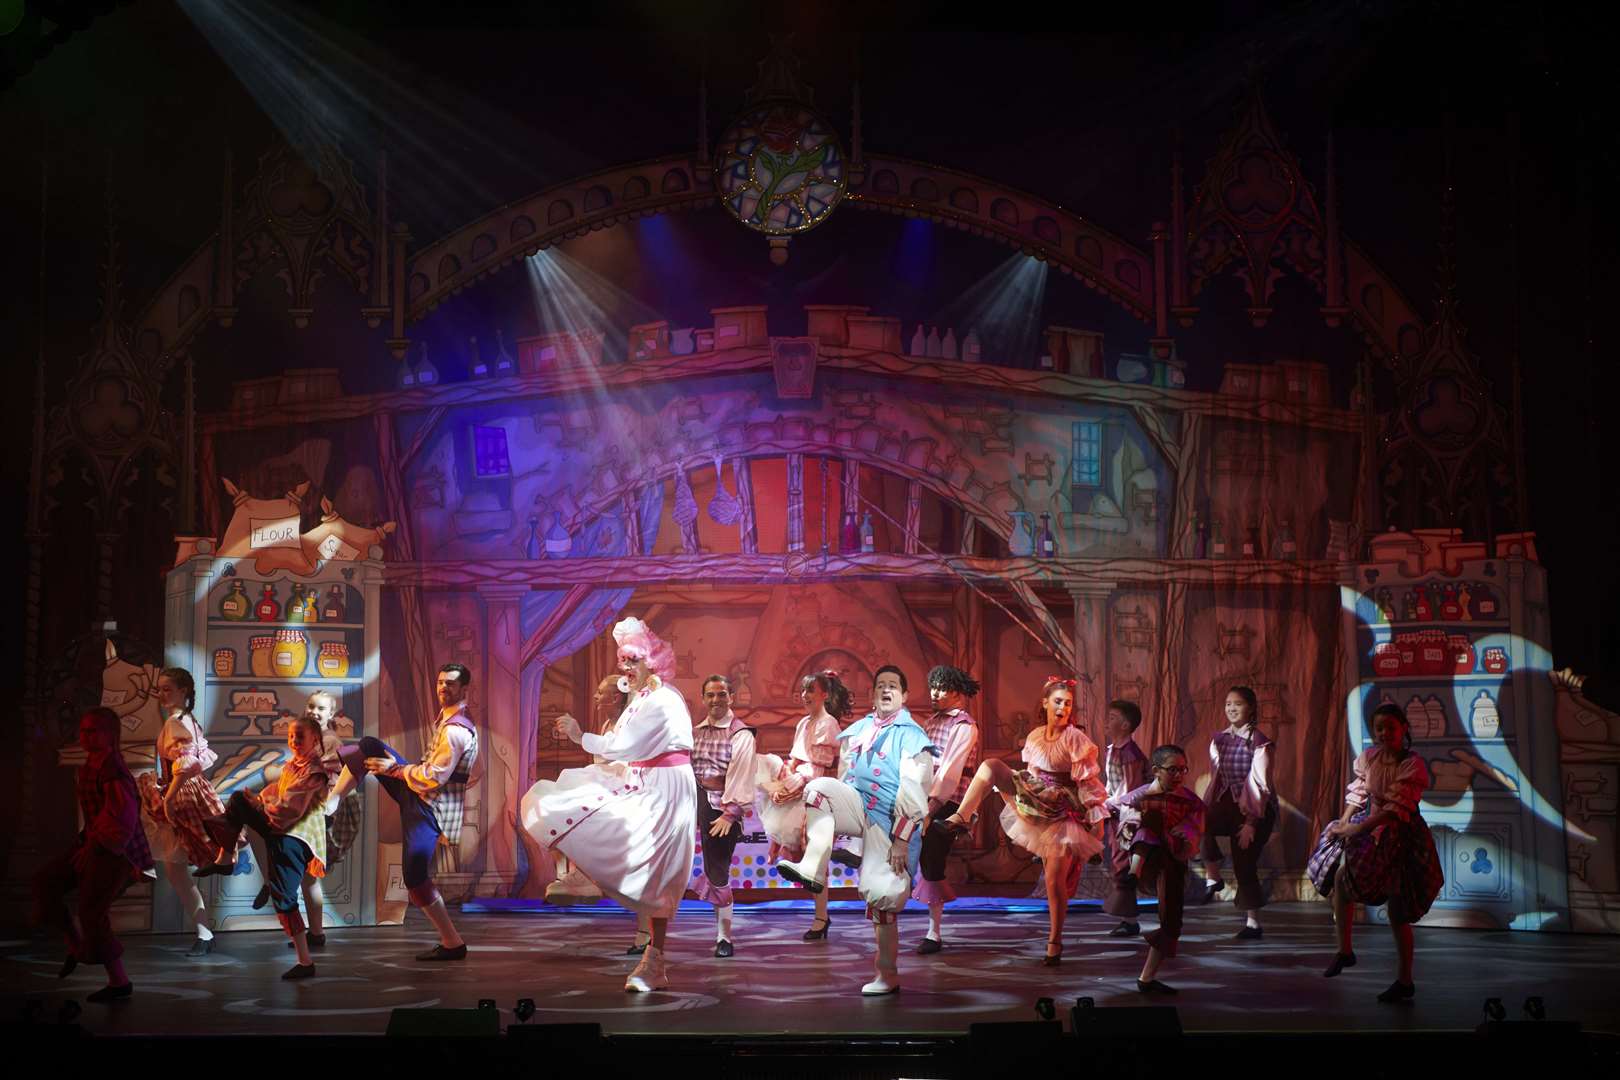 Beauty and the Beast was the 2019 pantomime at Eden Court.